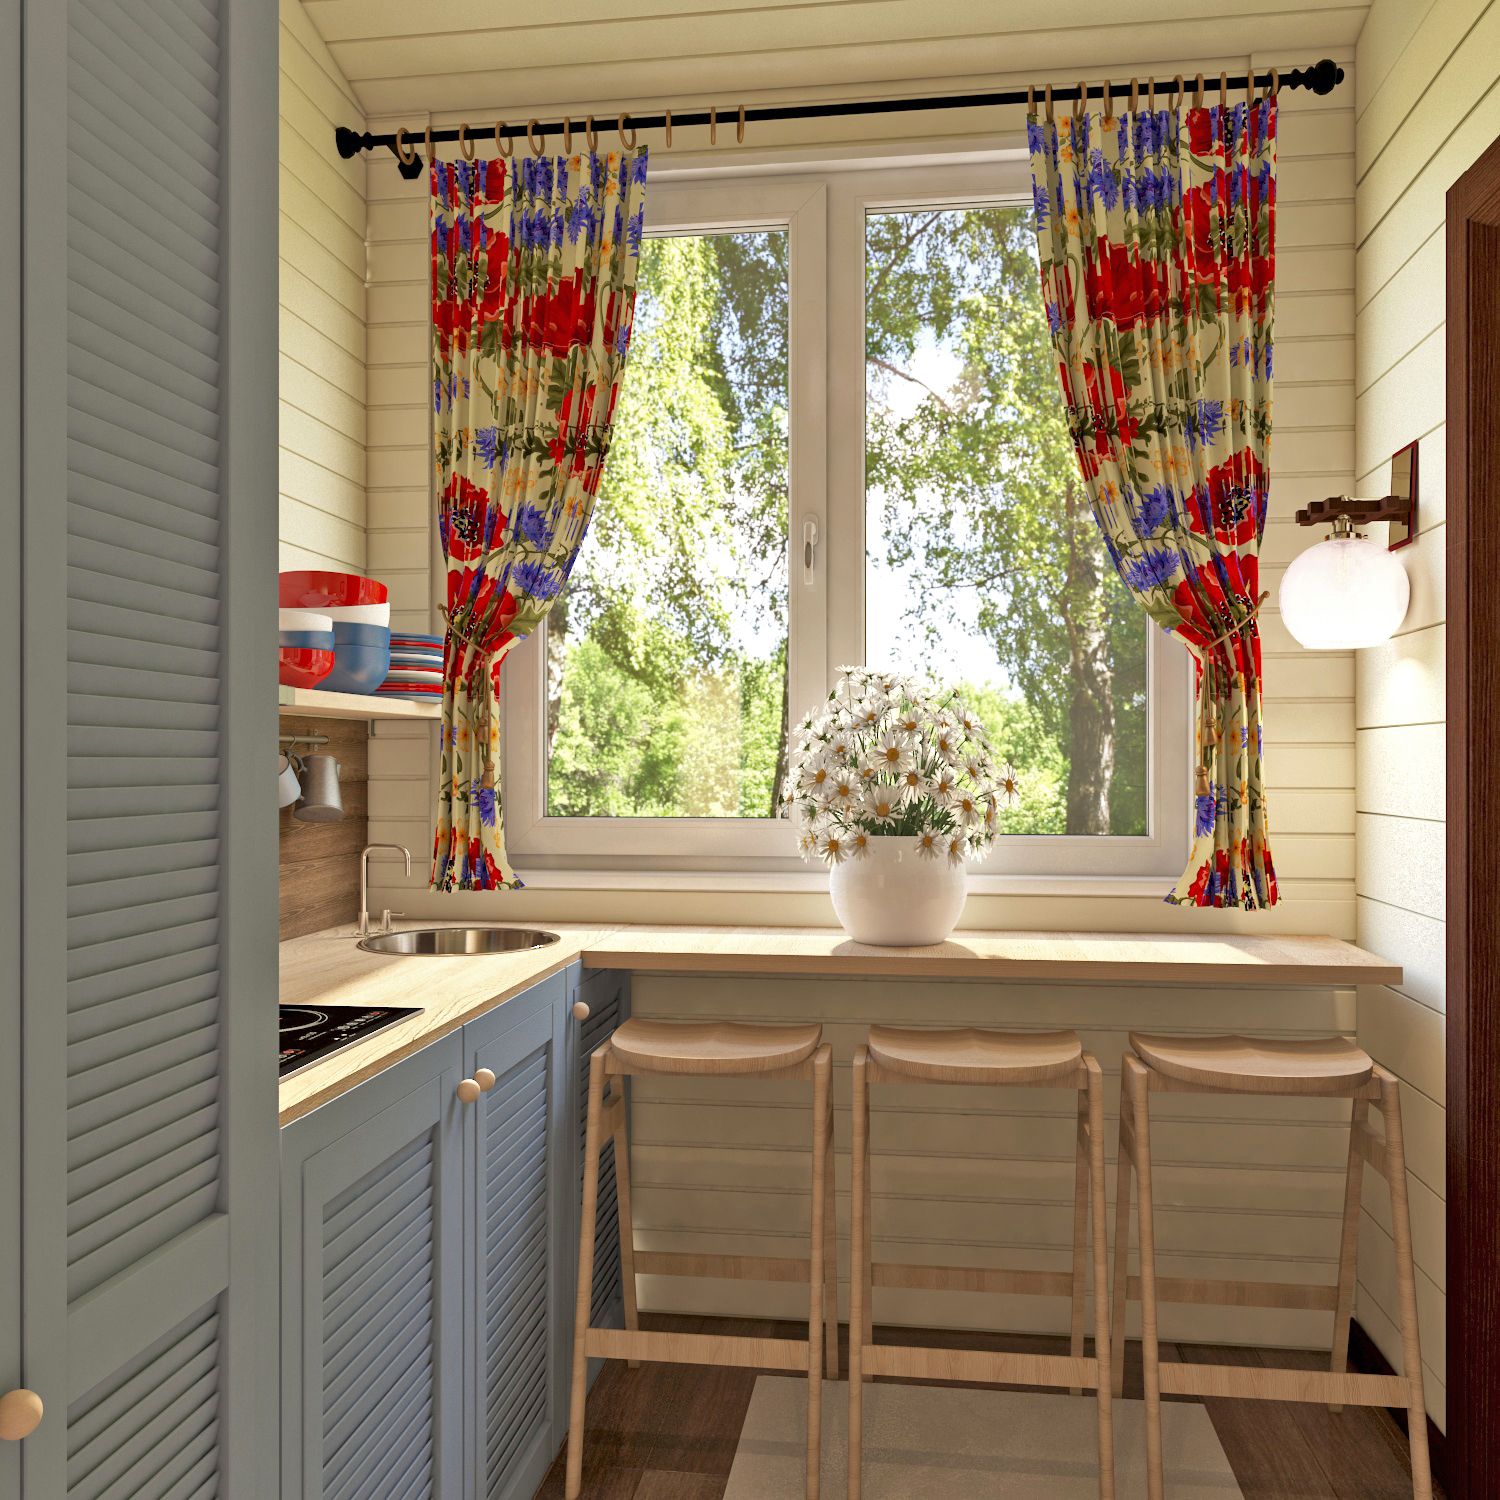 Favorite summer house in 3d max vray 3.0 image